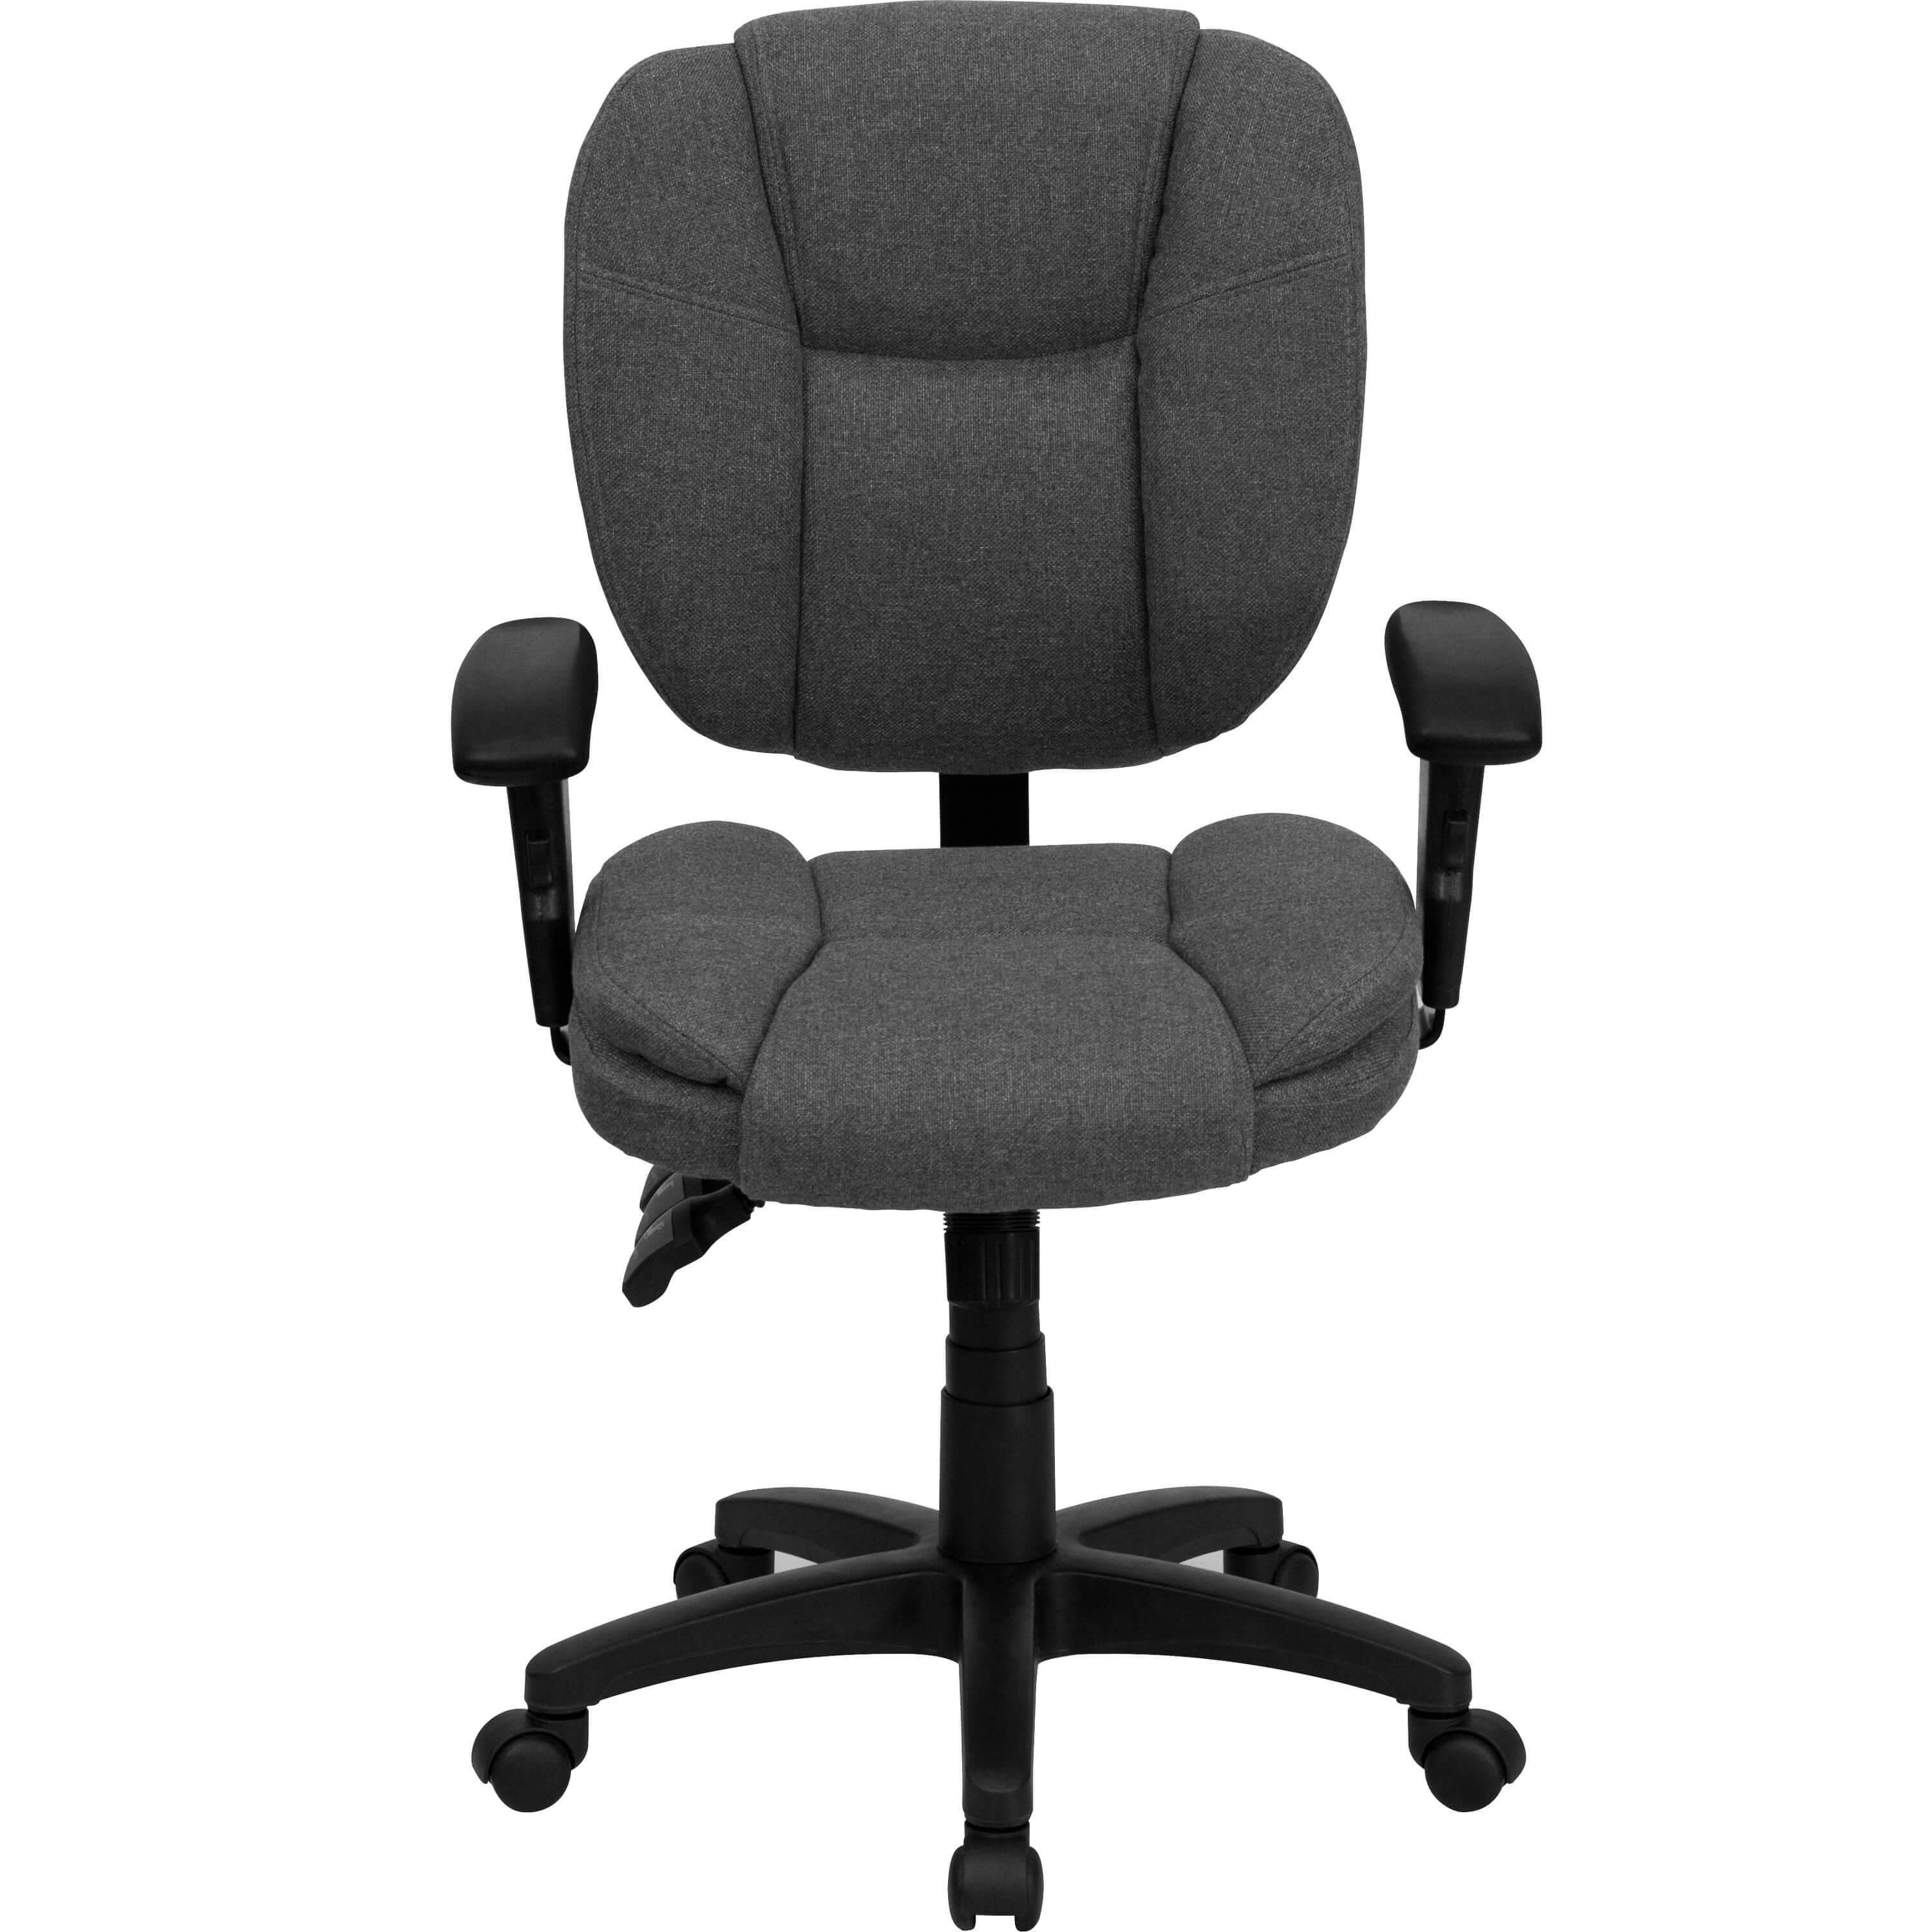 Cool desk chairs CUB GO 930F GY ARMS GG FLA